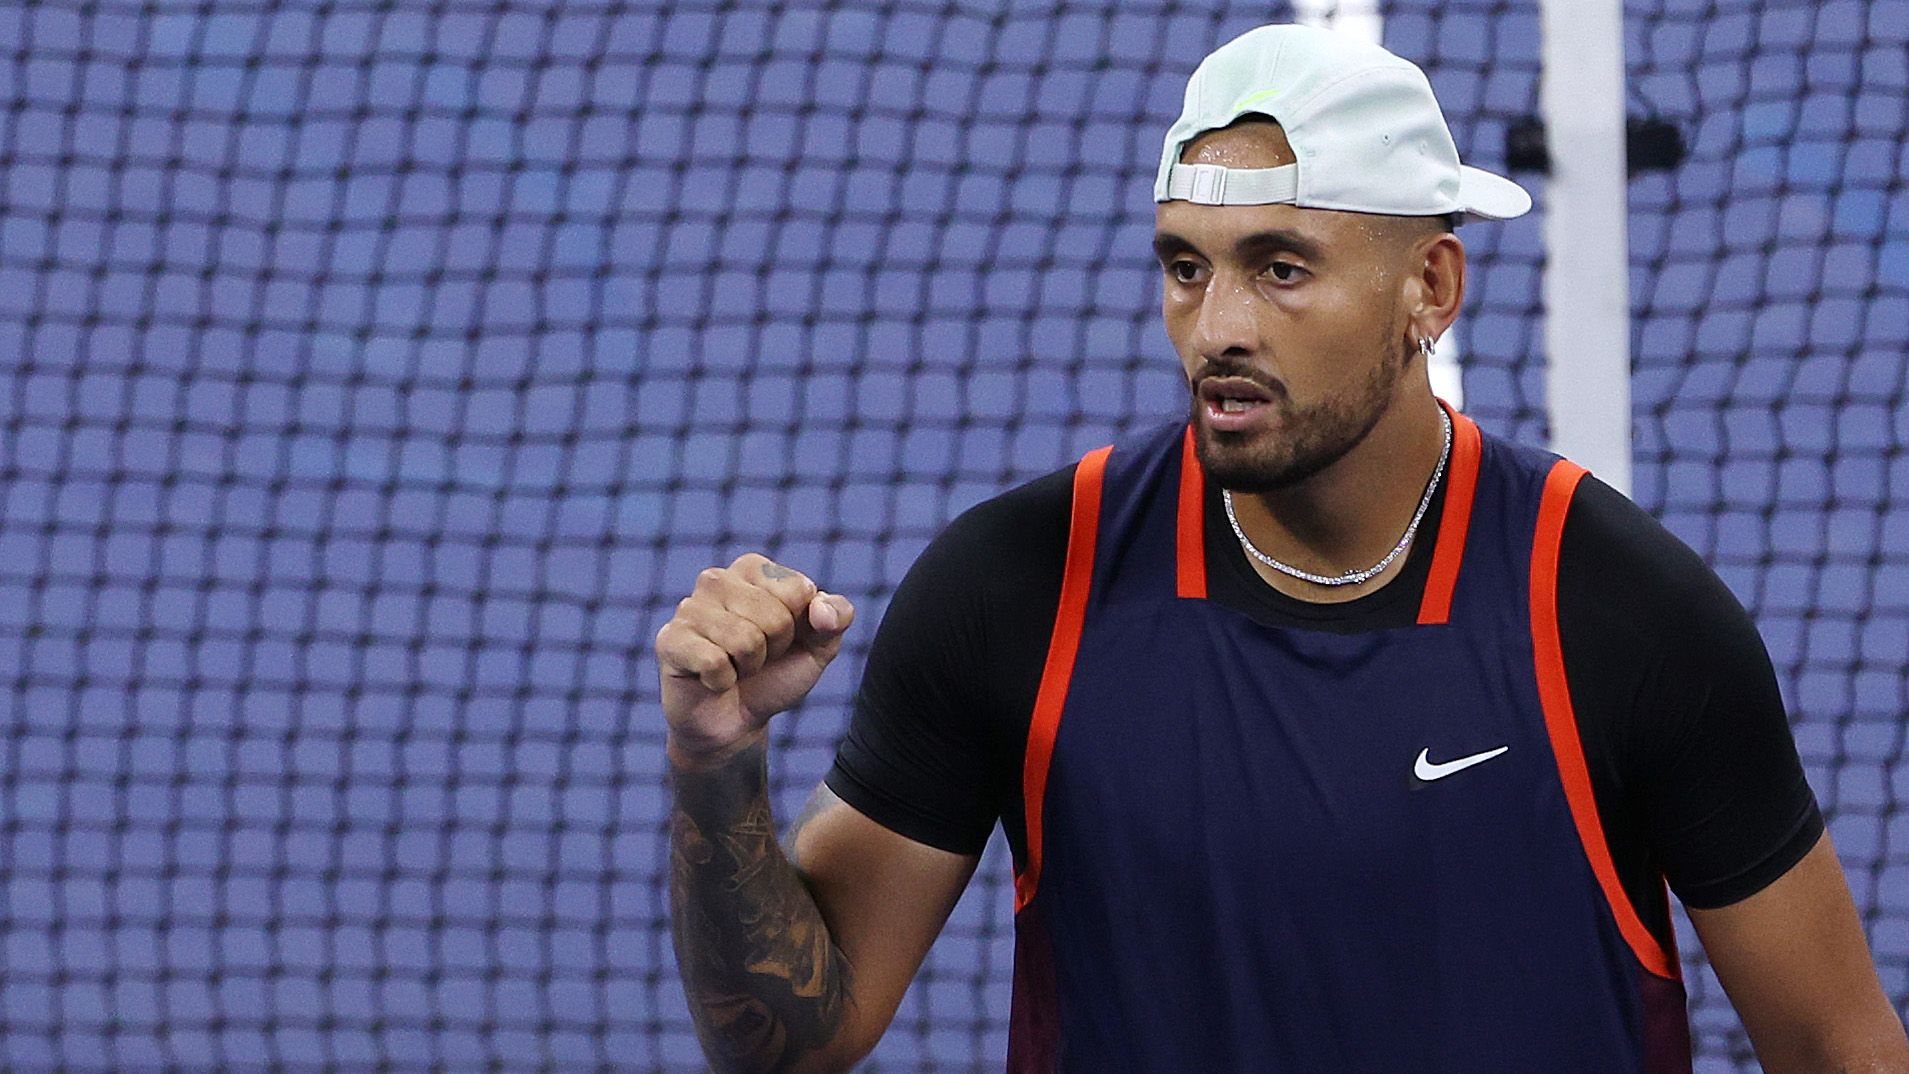 Nick Kyrgios cruises into fourth round after beating JJ Wolf, sets up mouthwatering clash